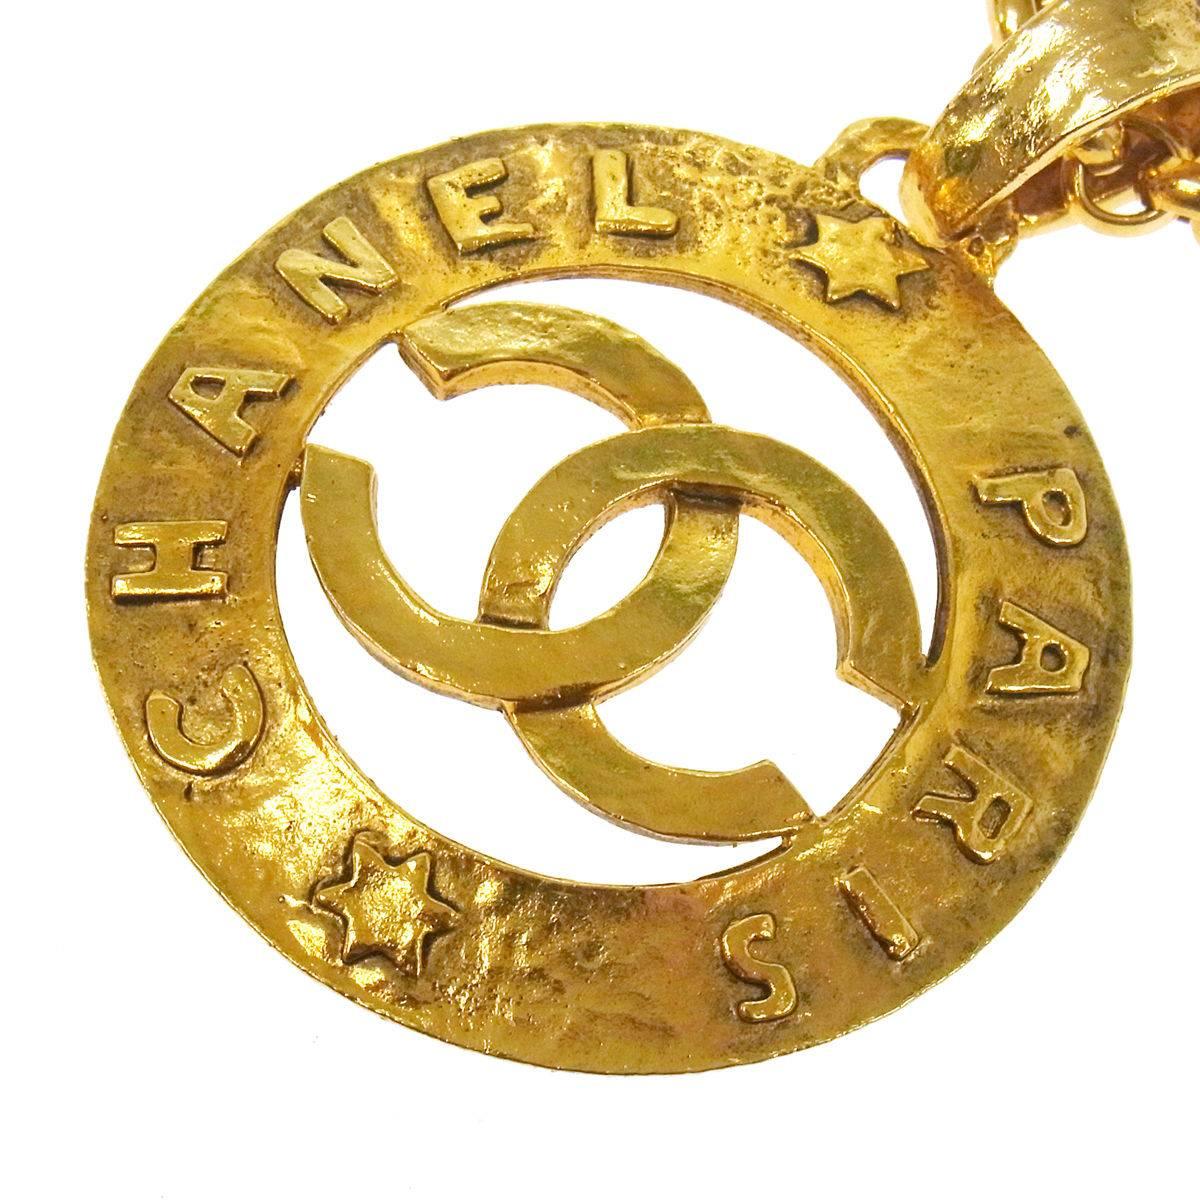 CURATOR'S NOTES

Metal
Gold tone
Lobster claw closure
Made in France
Charm diameter 1.8"
Chain length 30.5"
Includes original Chanel box

Shop Newfound Luxury for authentic vintage Chanel necklaces and jewelry.